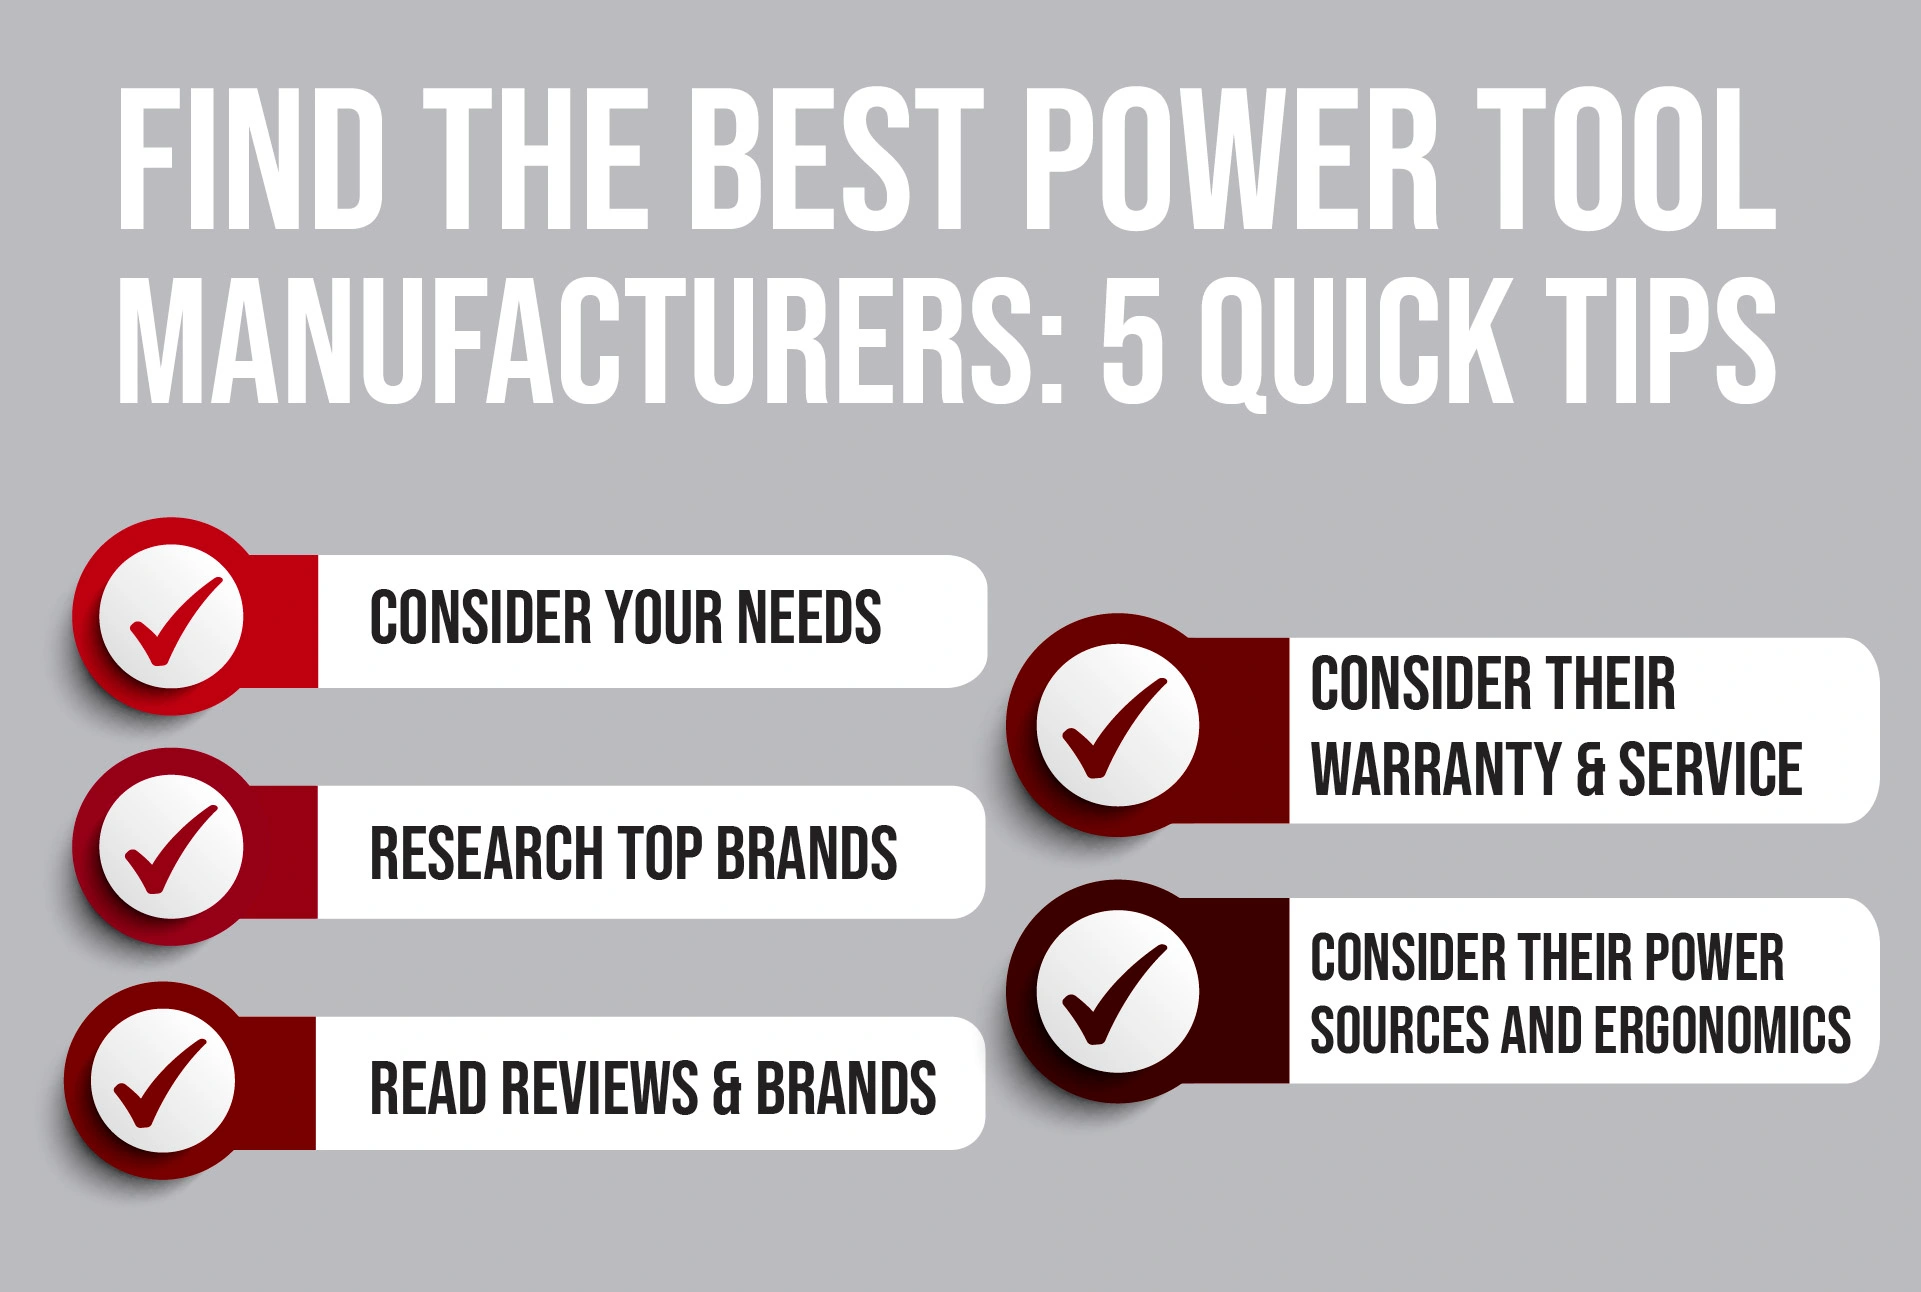 An Infographic about how to find the best power tool manufacturer